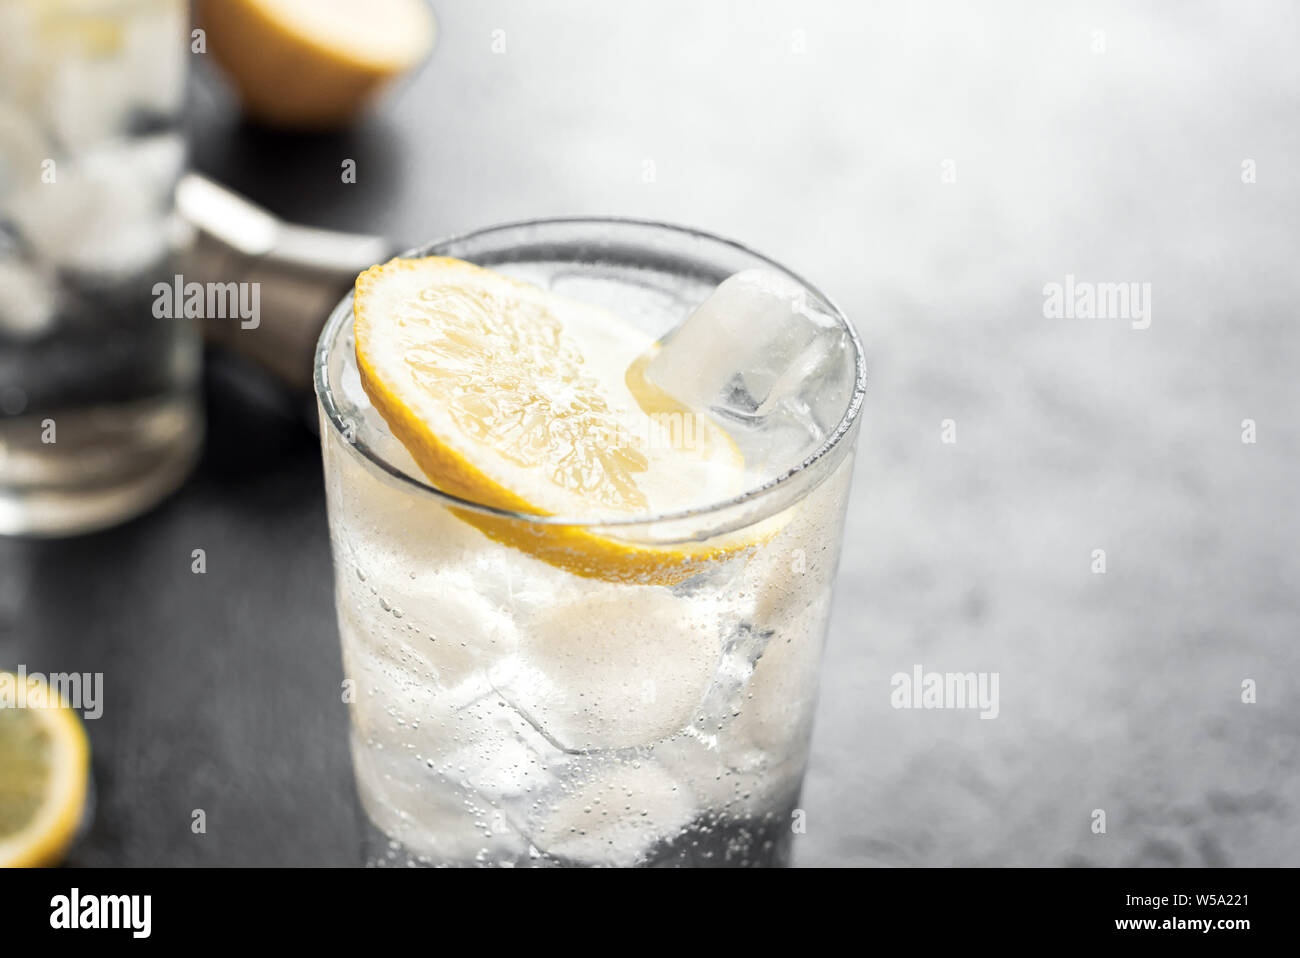 Alcohol Drink Gin Tonic Cocktail Vodka Cocktail Tom Collins Cocktail With Lemon And Ice On Rustic Black Stone Table Copy Space Top View Iced So Stock Photo Alamy,Crock Pot Chicken And Rice